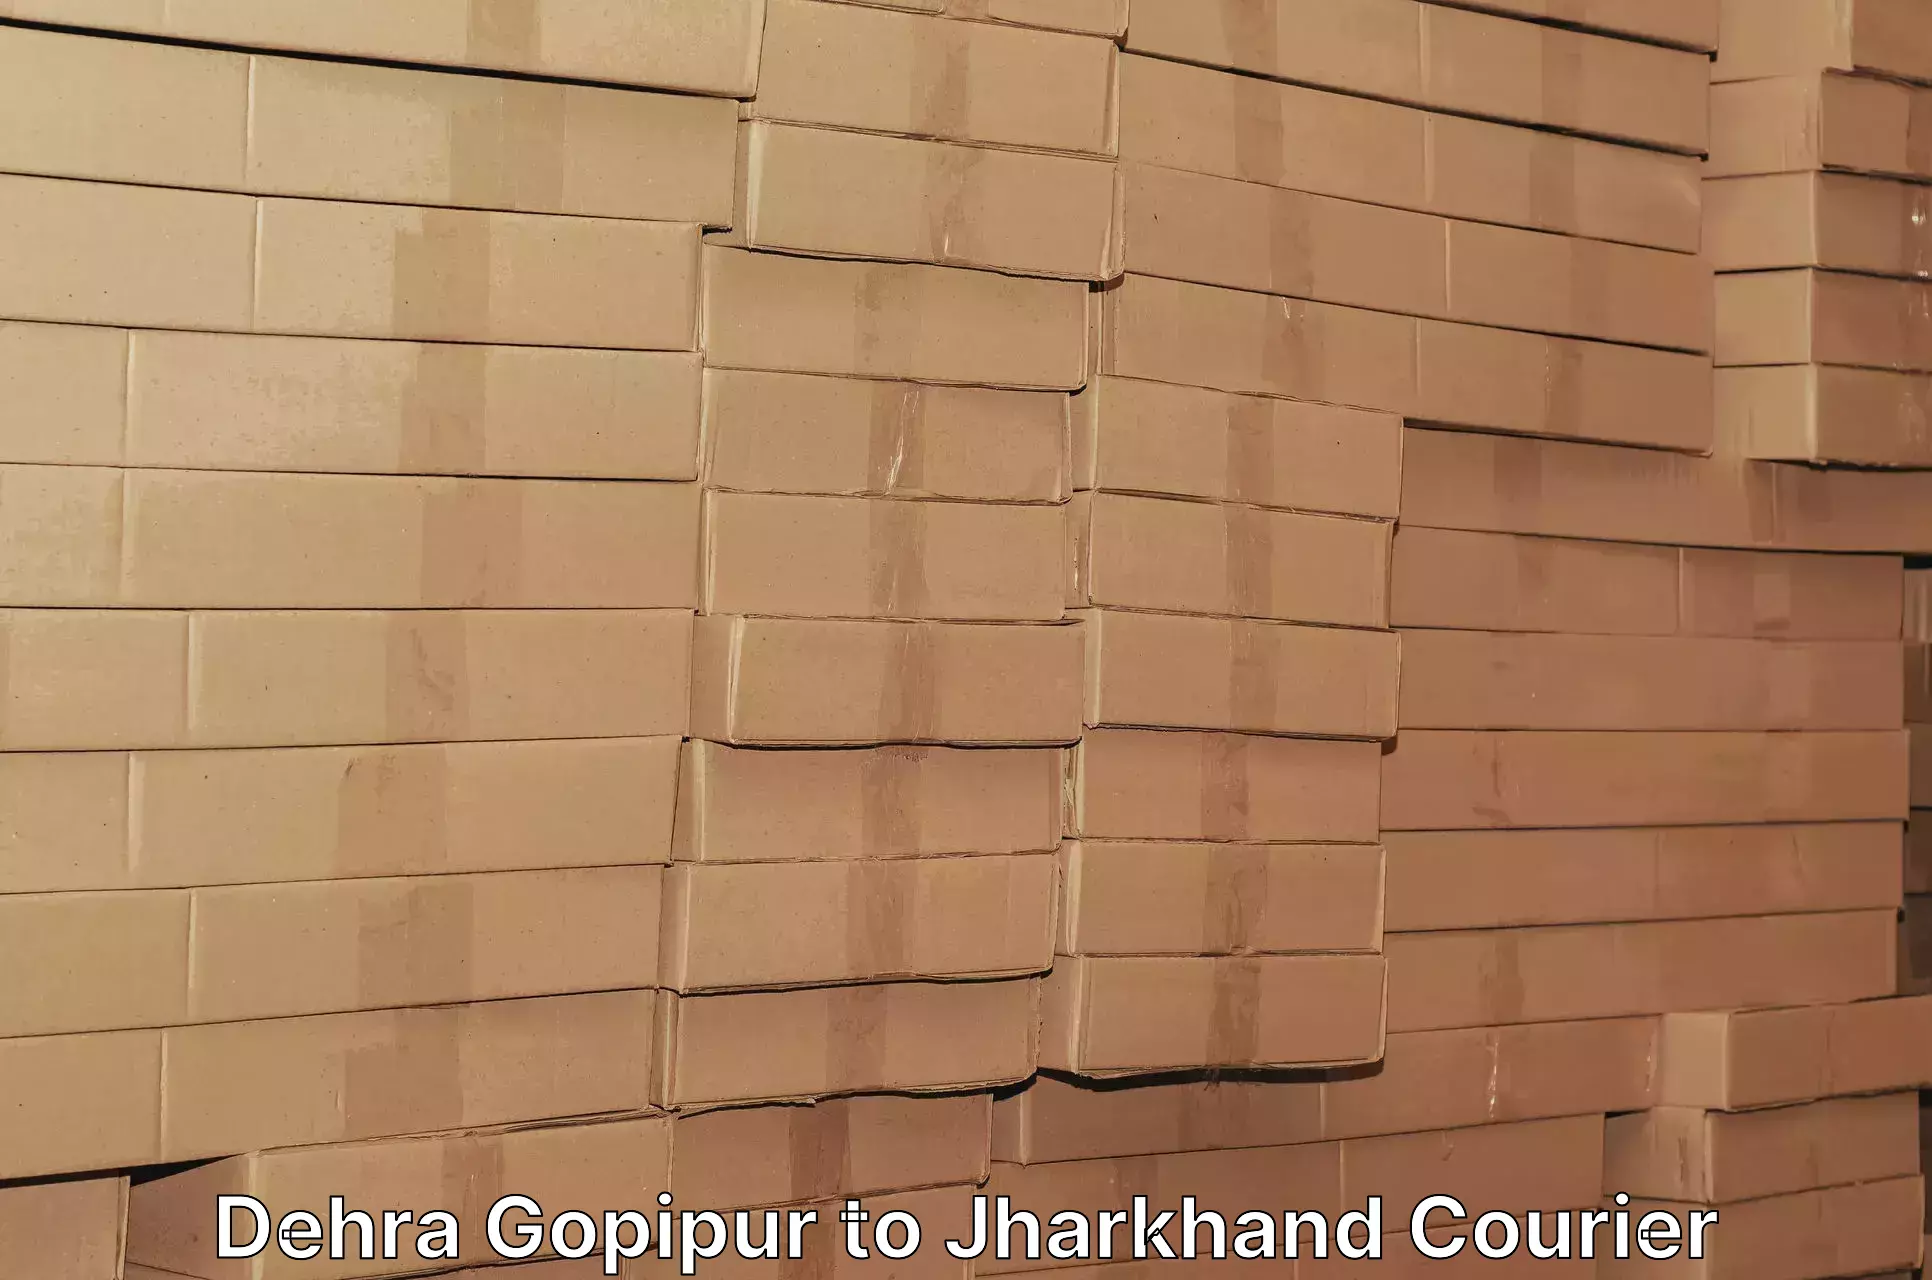 24-hour courier services Dehra Gopipur to Chandil